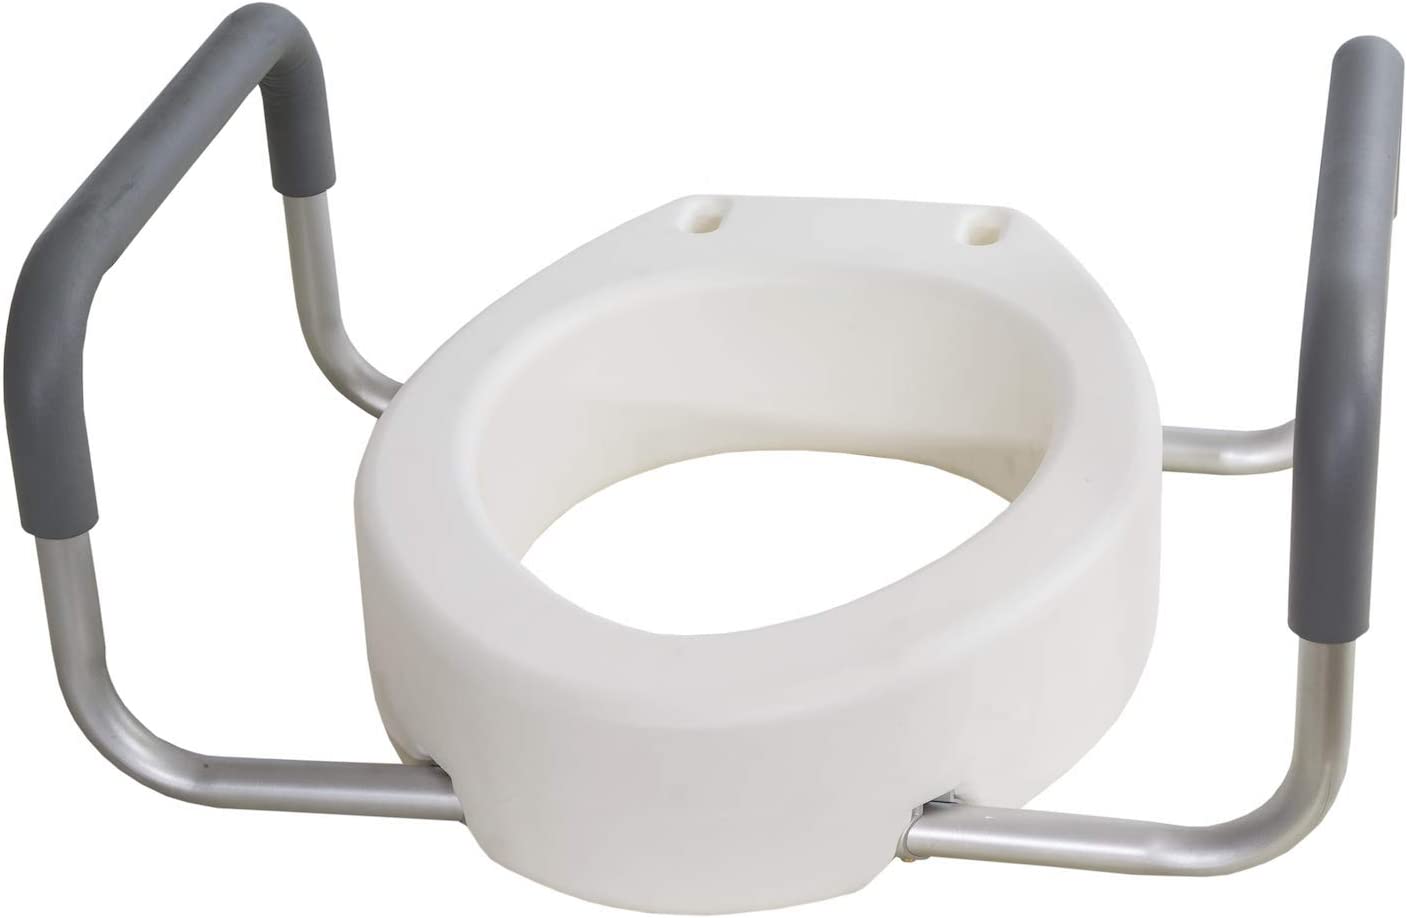 Essential Medical Supply Toilet Seat Riser with Removable Arms - Standard Bowl, 17.5 x 13.5 x 3.5 Inch